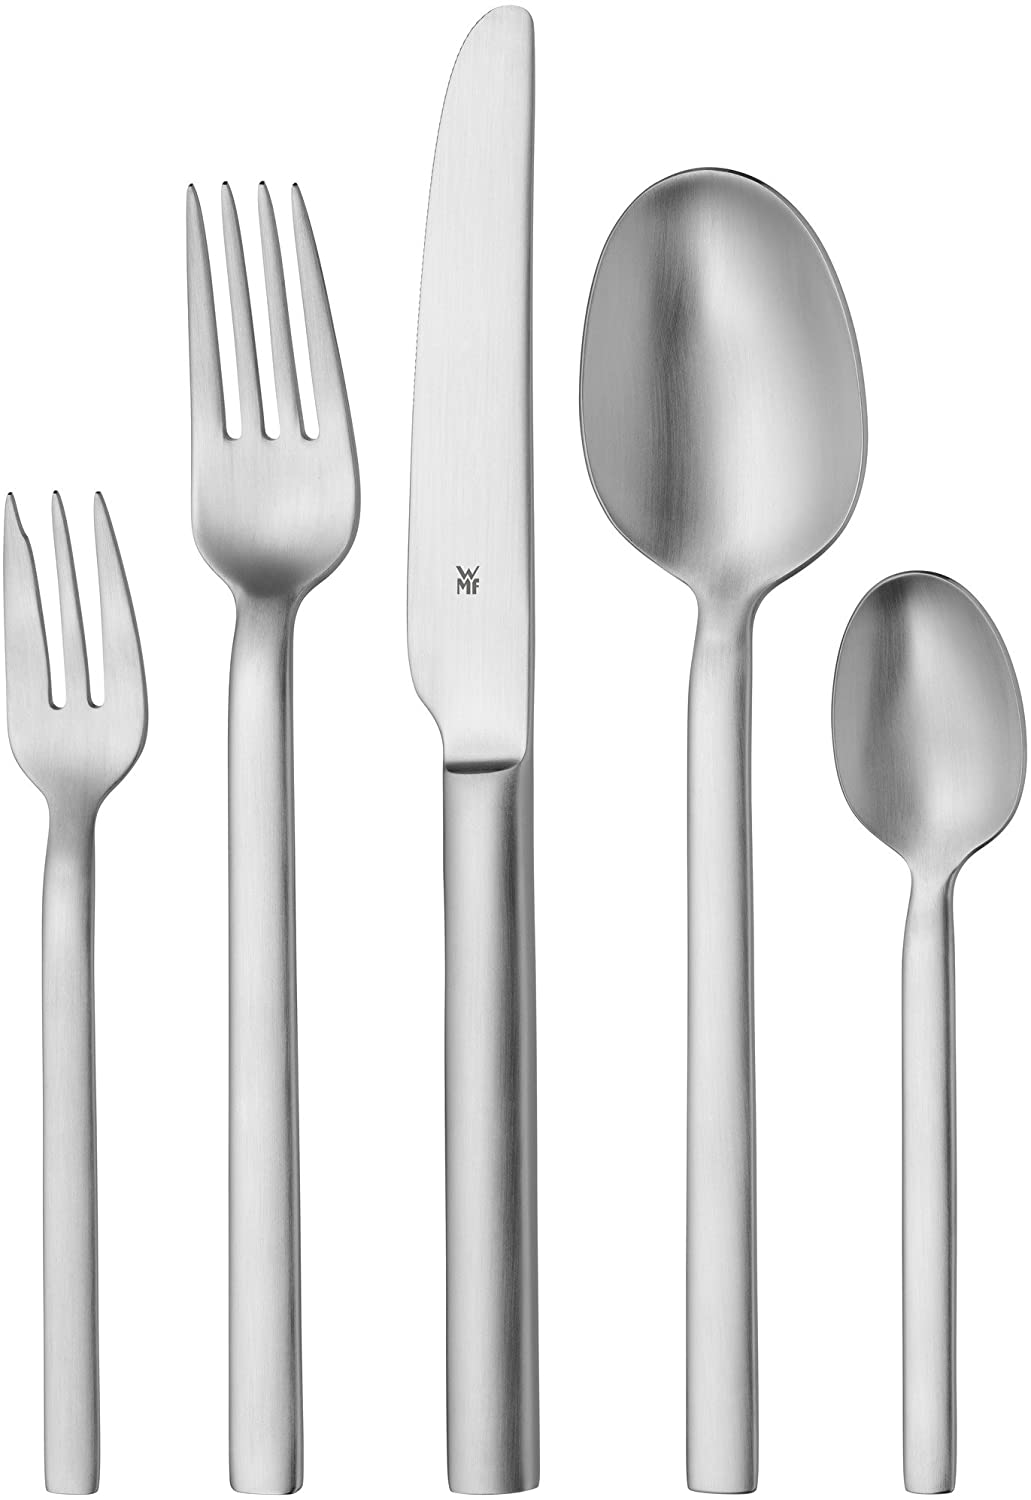 WMF Alteo Cutlery Set 6 Pieces for 30 People Monobloc Knives Cromargan Matt Stainless Steel Dishwasher Safe